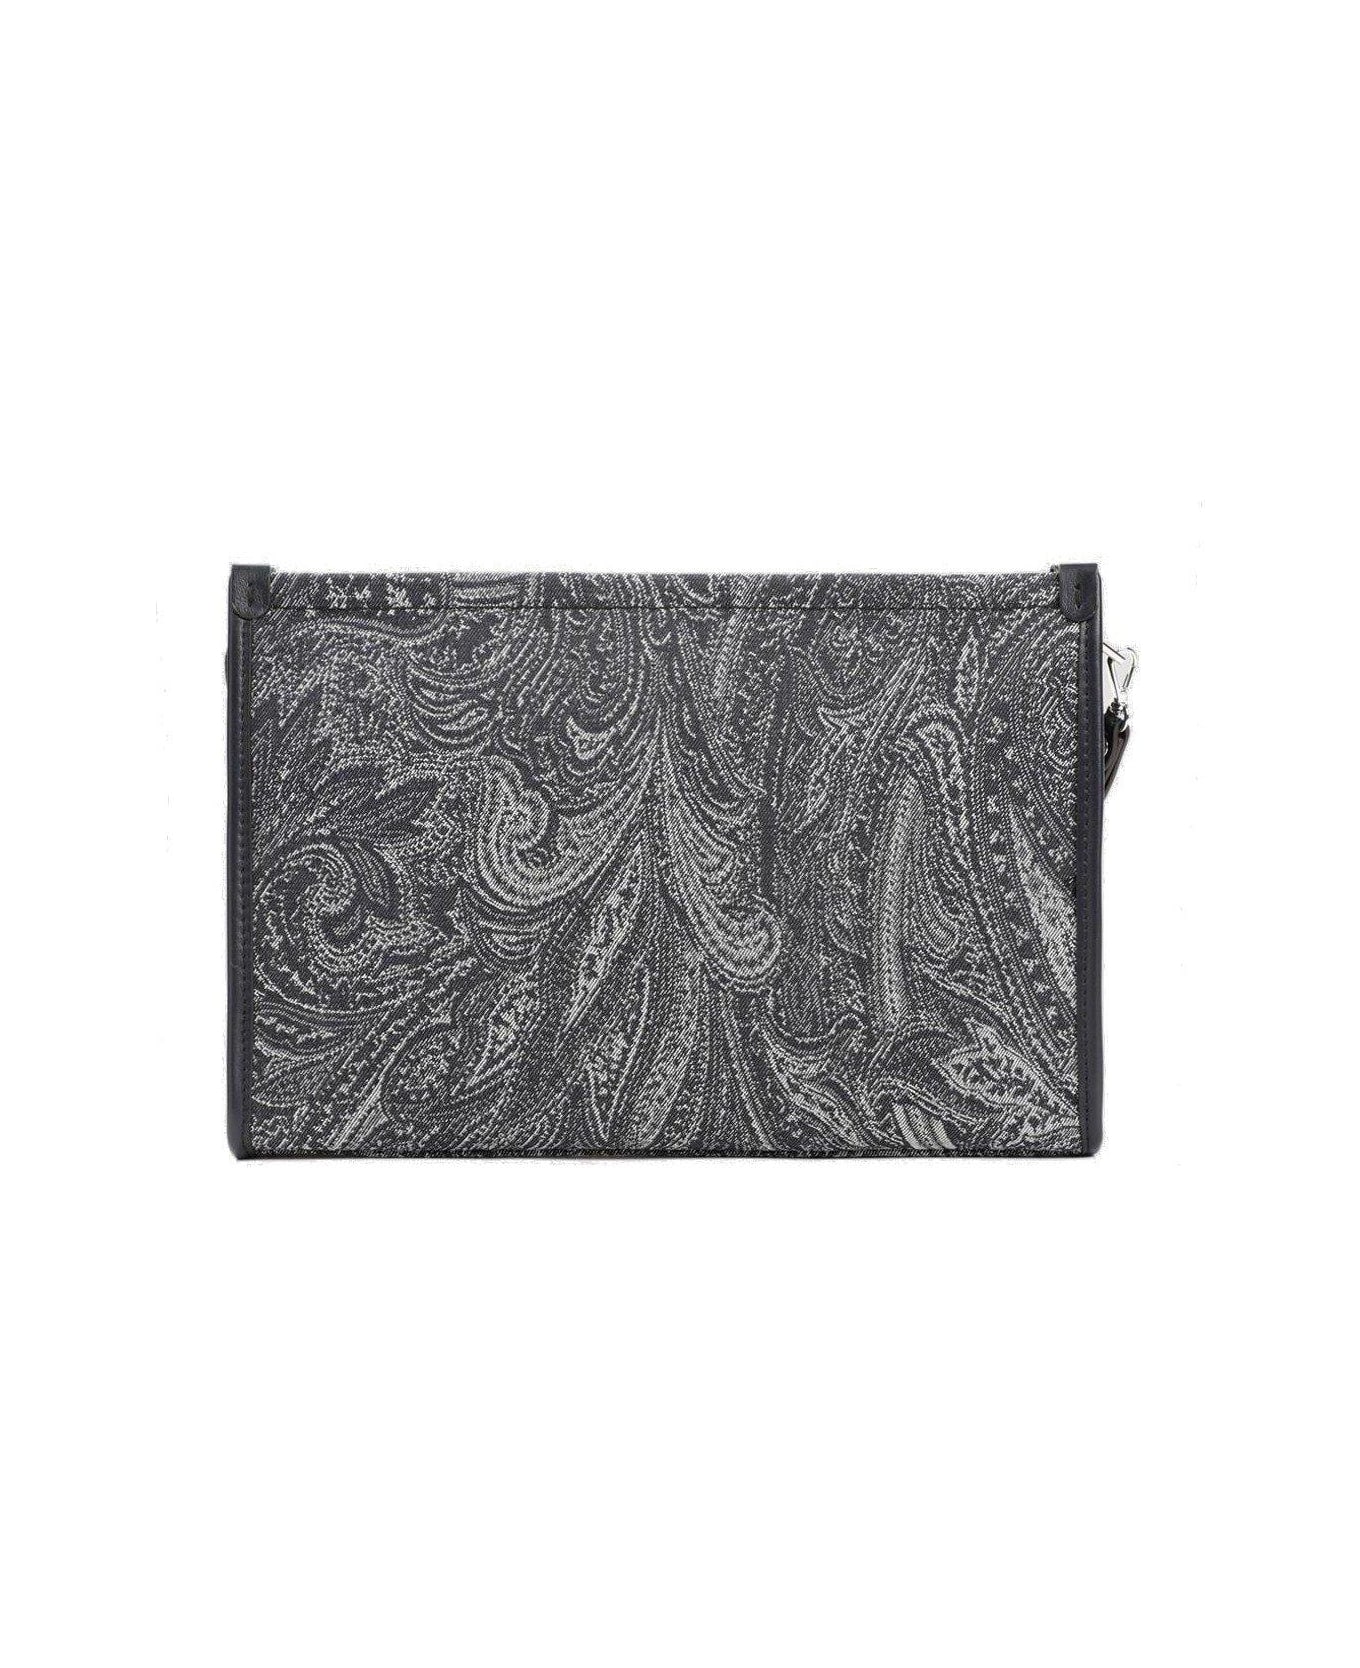 Etro Navy Blue Large Pouch With Paisley Jacquard Motif - Blue バッグ